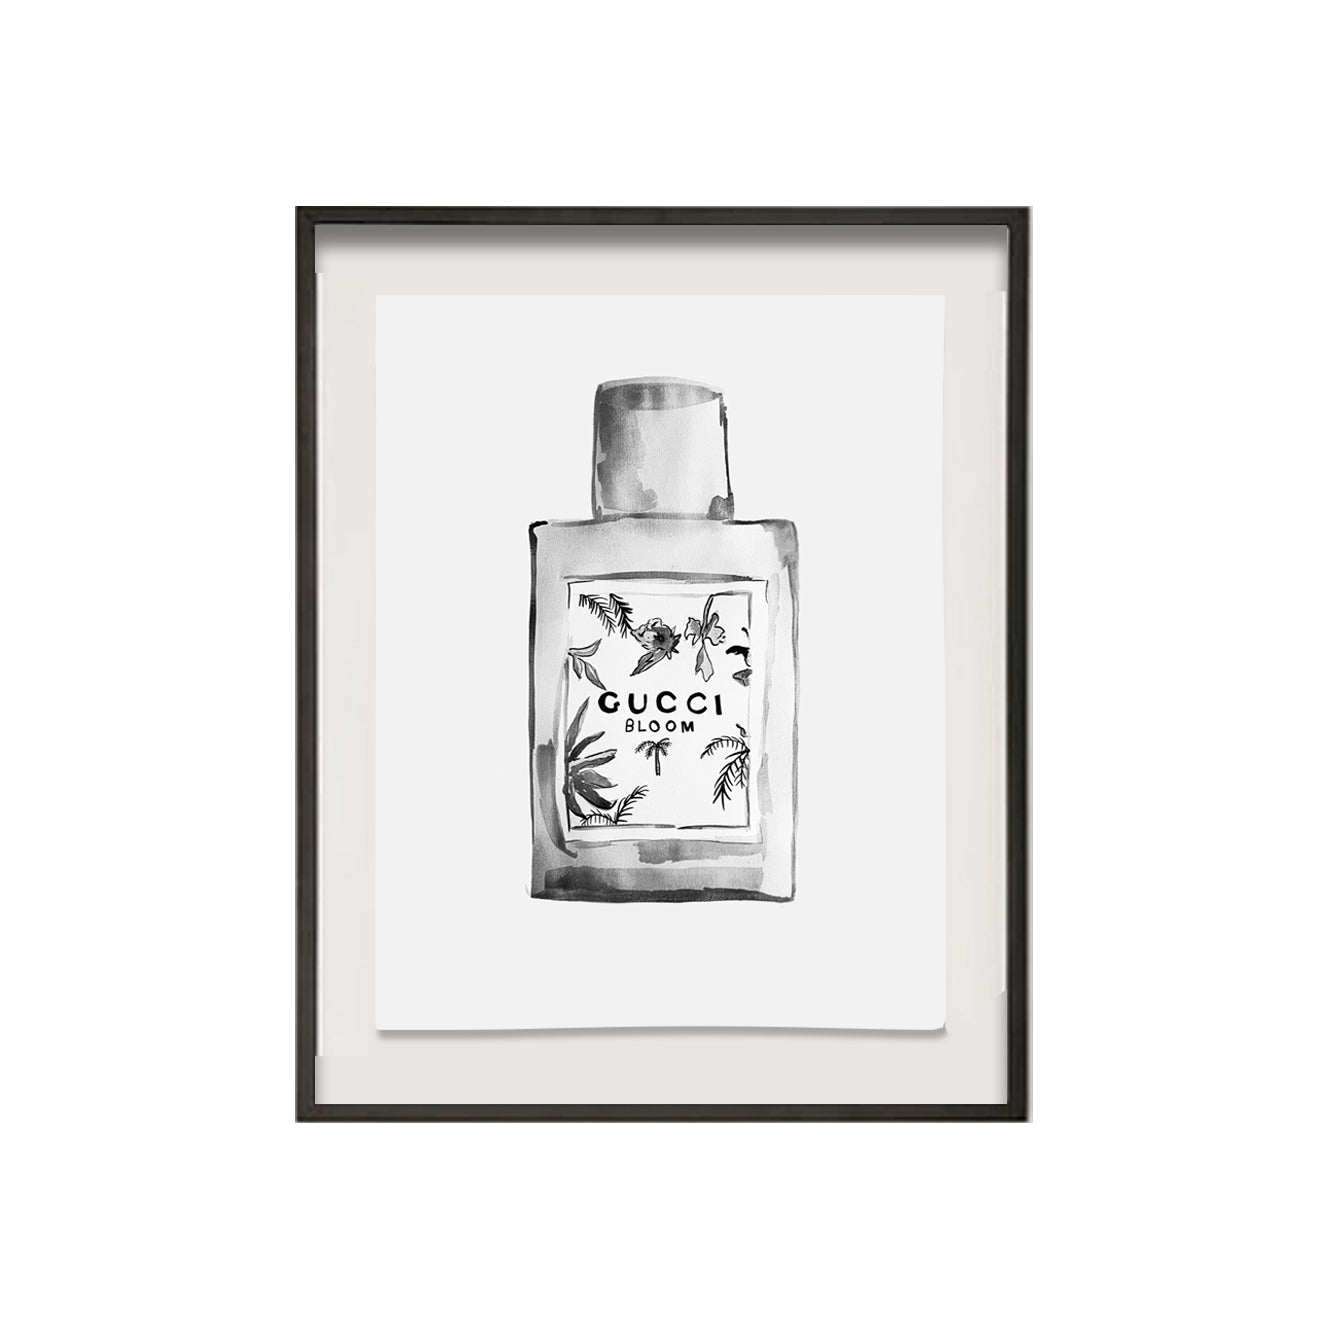 Signature Gucci Bloom Ink Palm | made to order with artist Libby Watkins